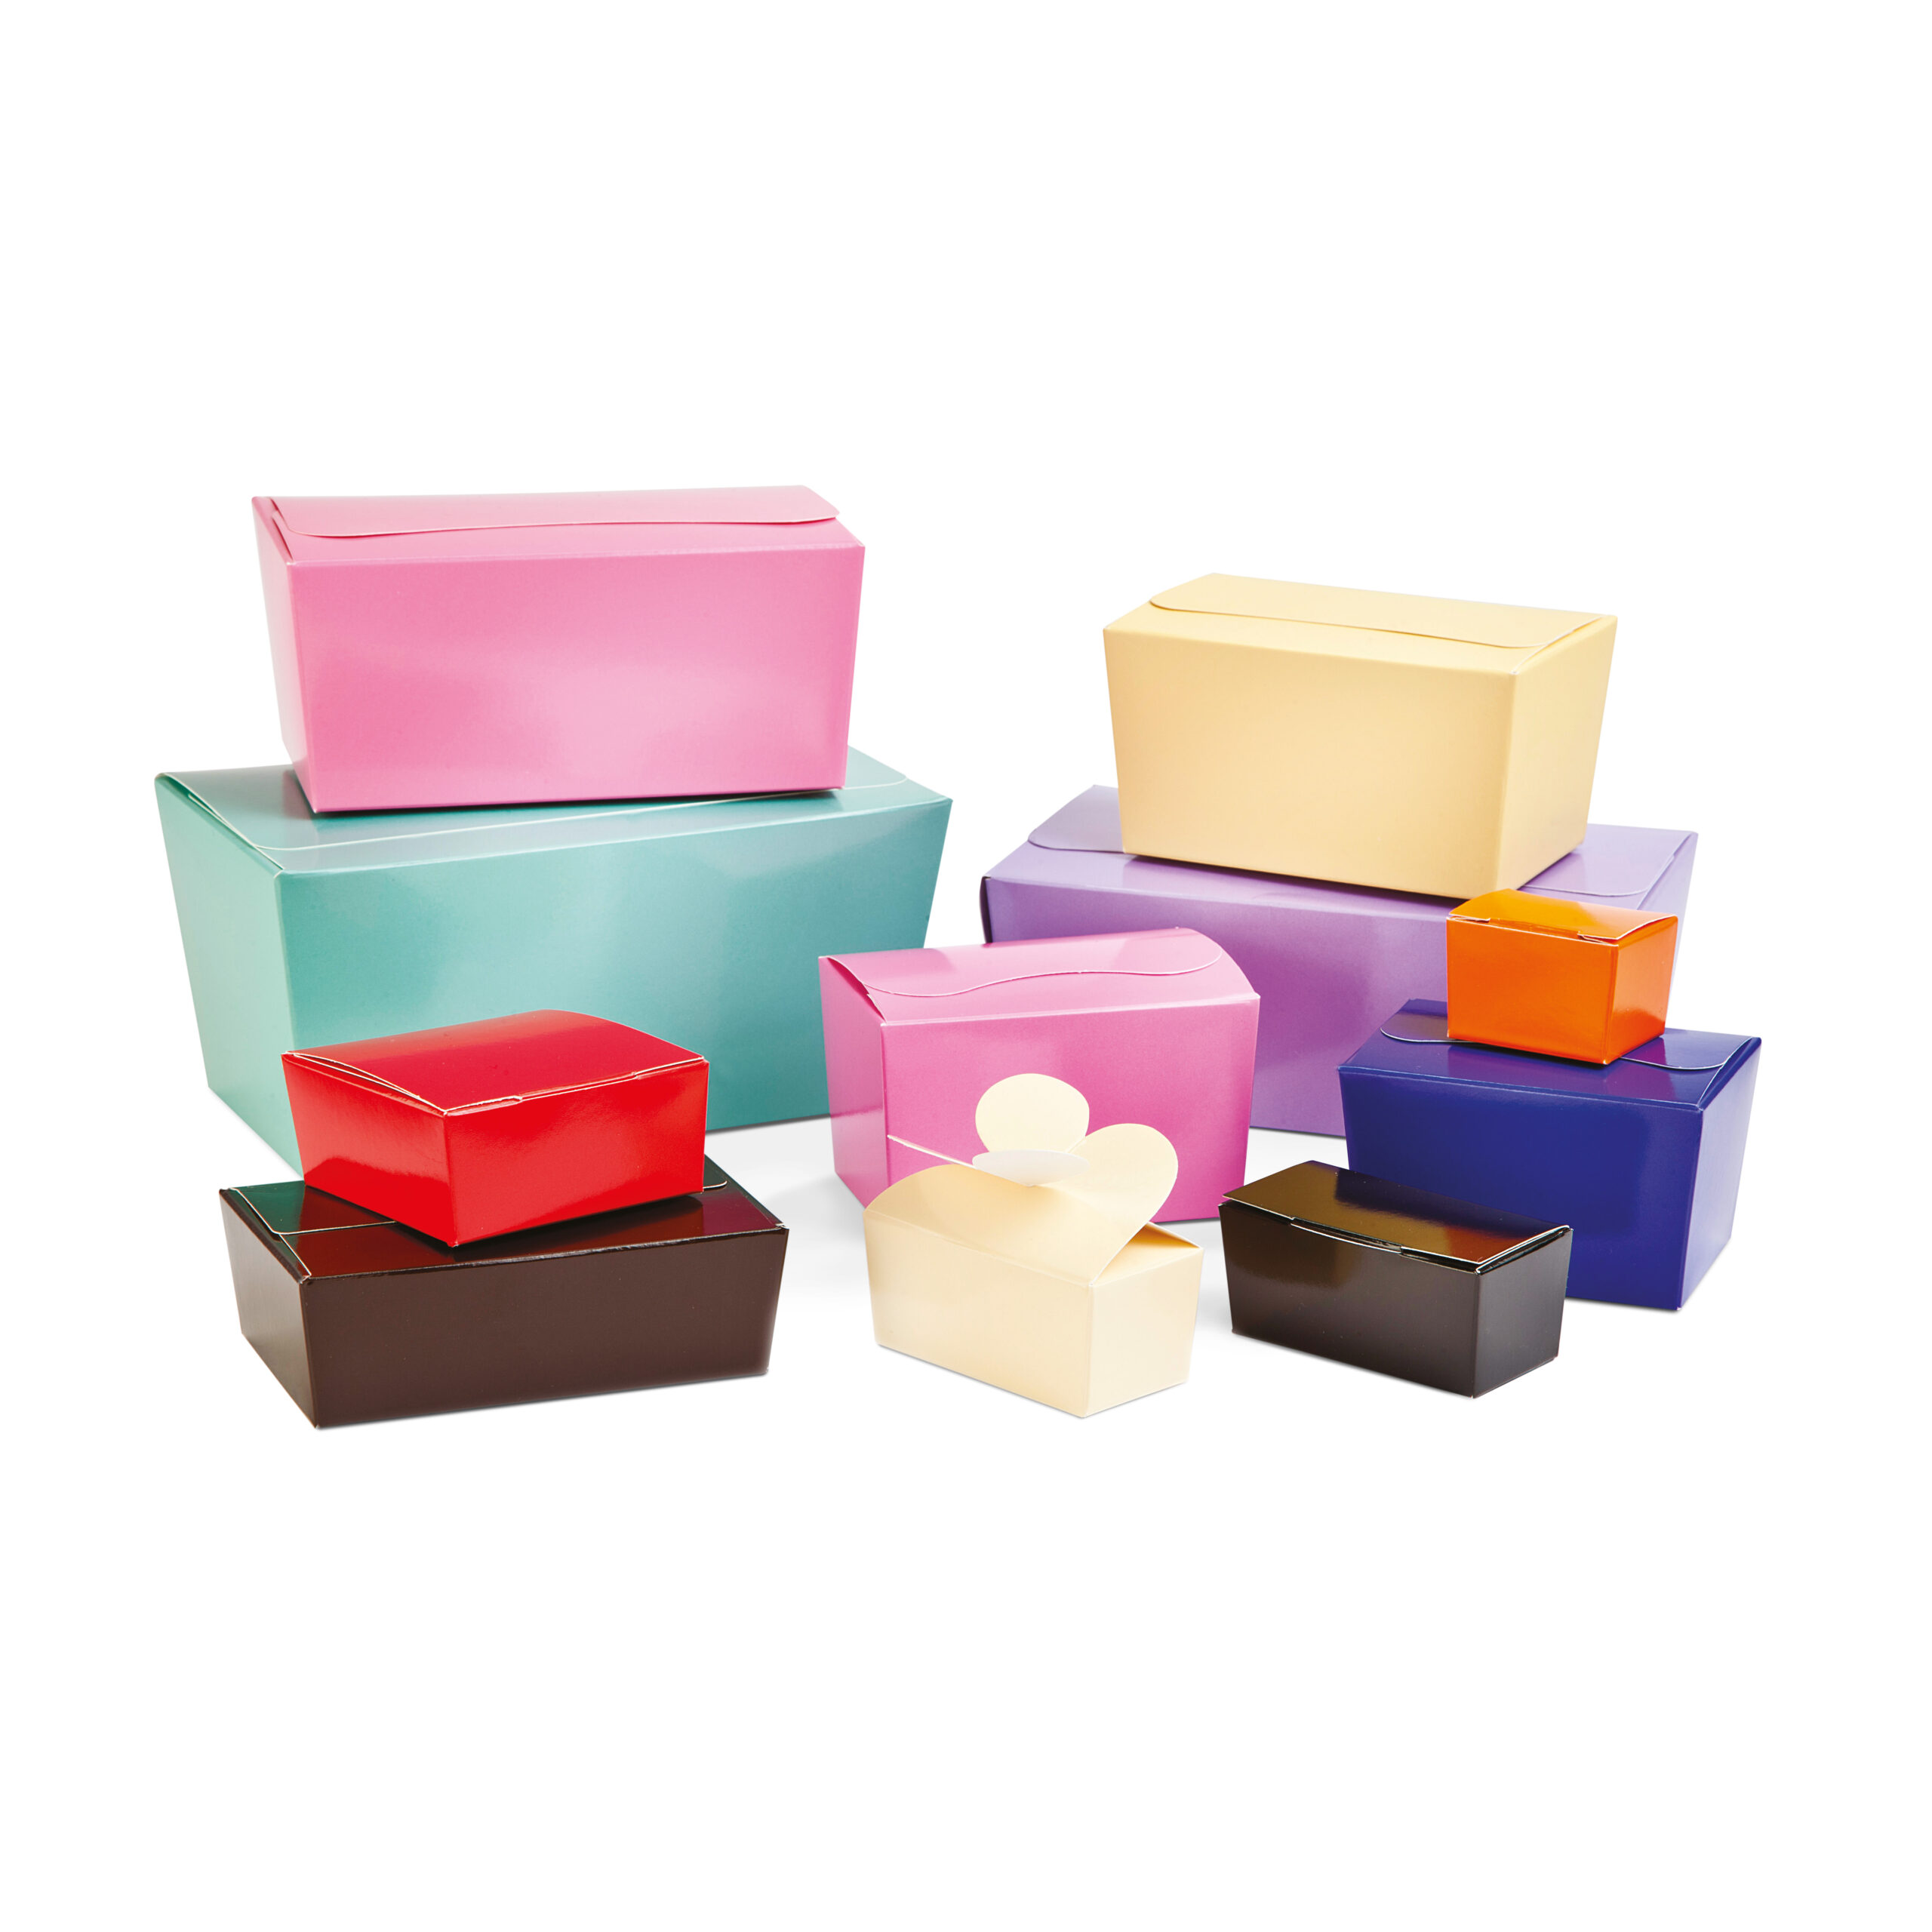 A variety of bright and generic ballotin boxes. Perfect for filling with artisan chocolates or gourmet truffles. Colours include pink, aqua, blue, orange, cream, brown, white, red, purple & white